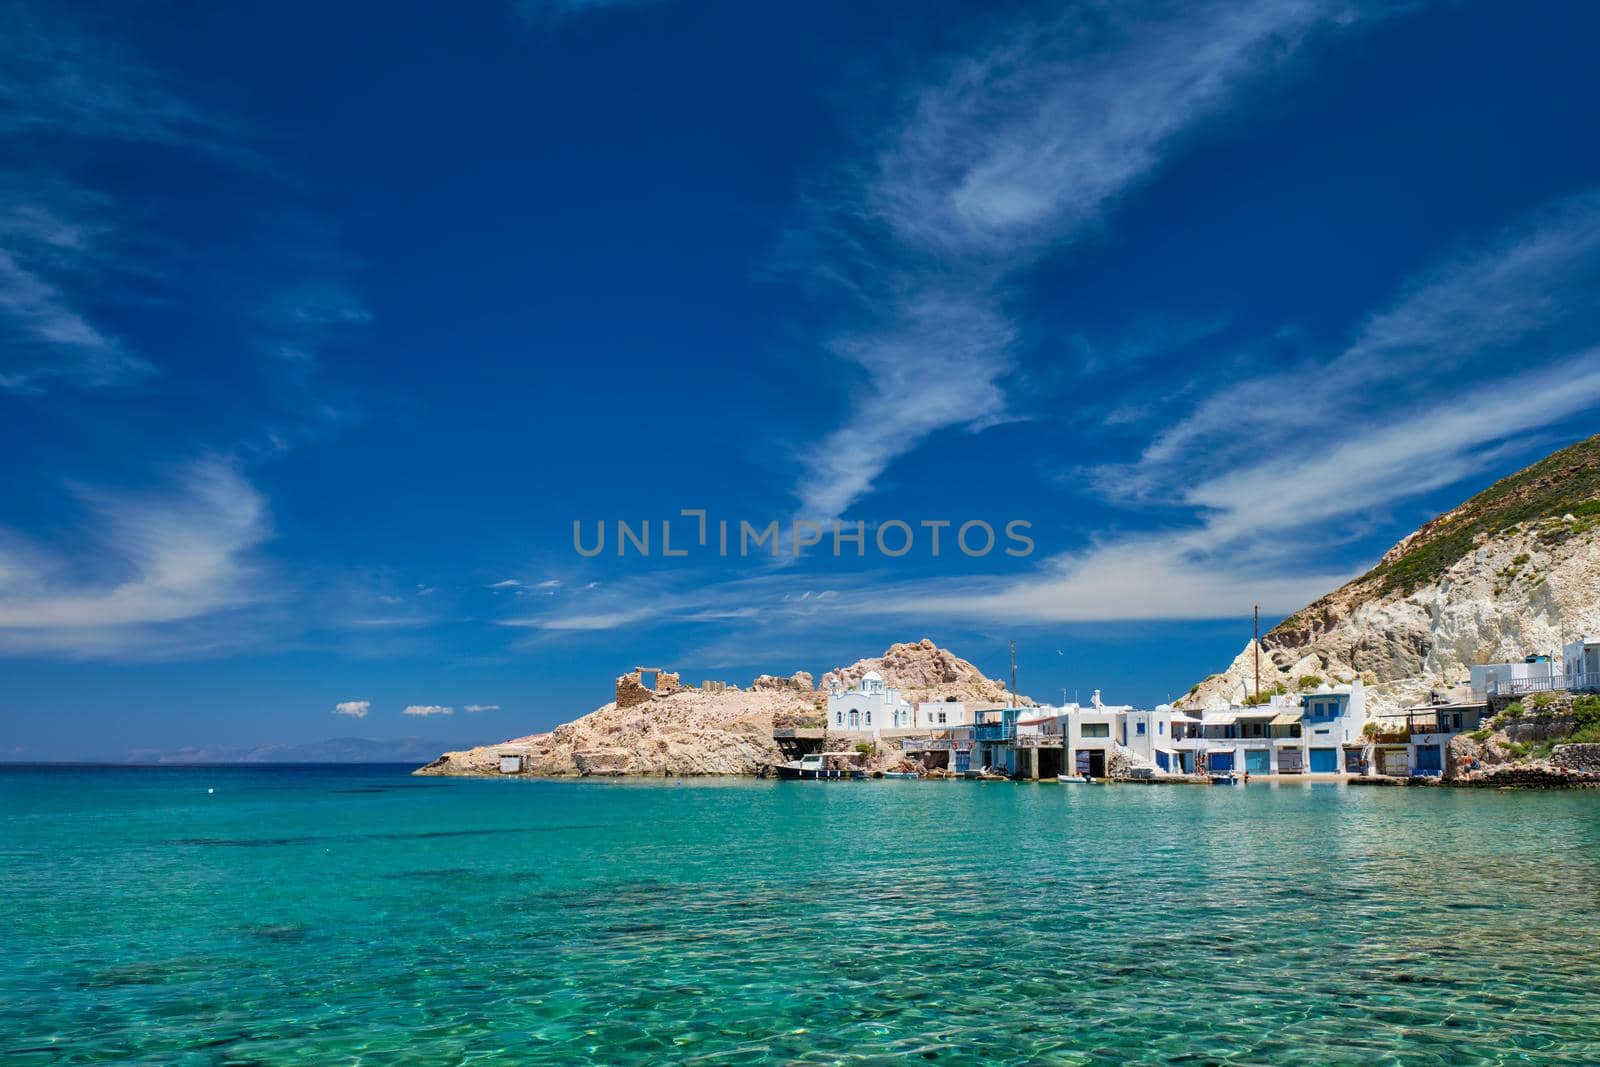 Greek village scenic picturesque view in Greece - the beach and fishing village of Firapotamos in Milos island, Greece